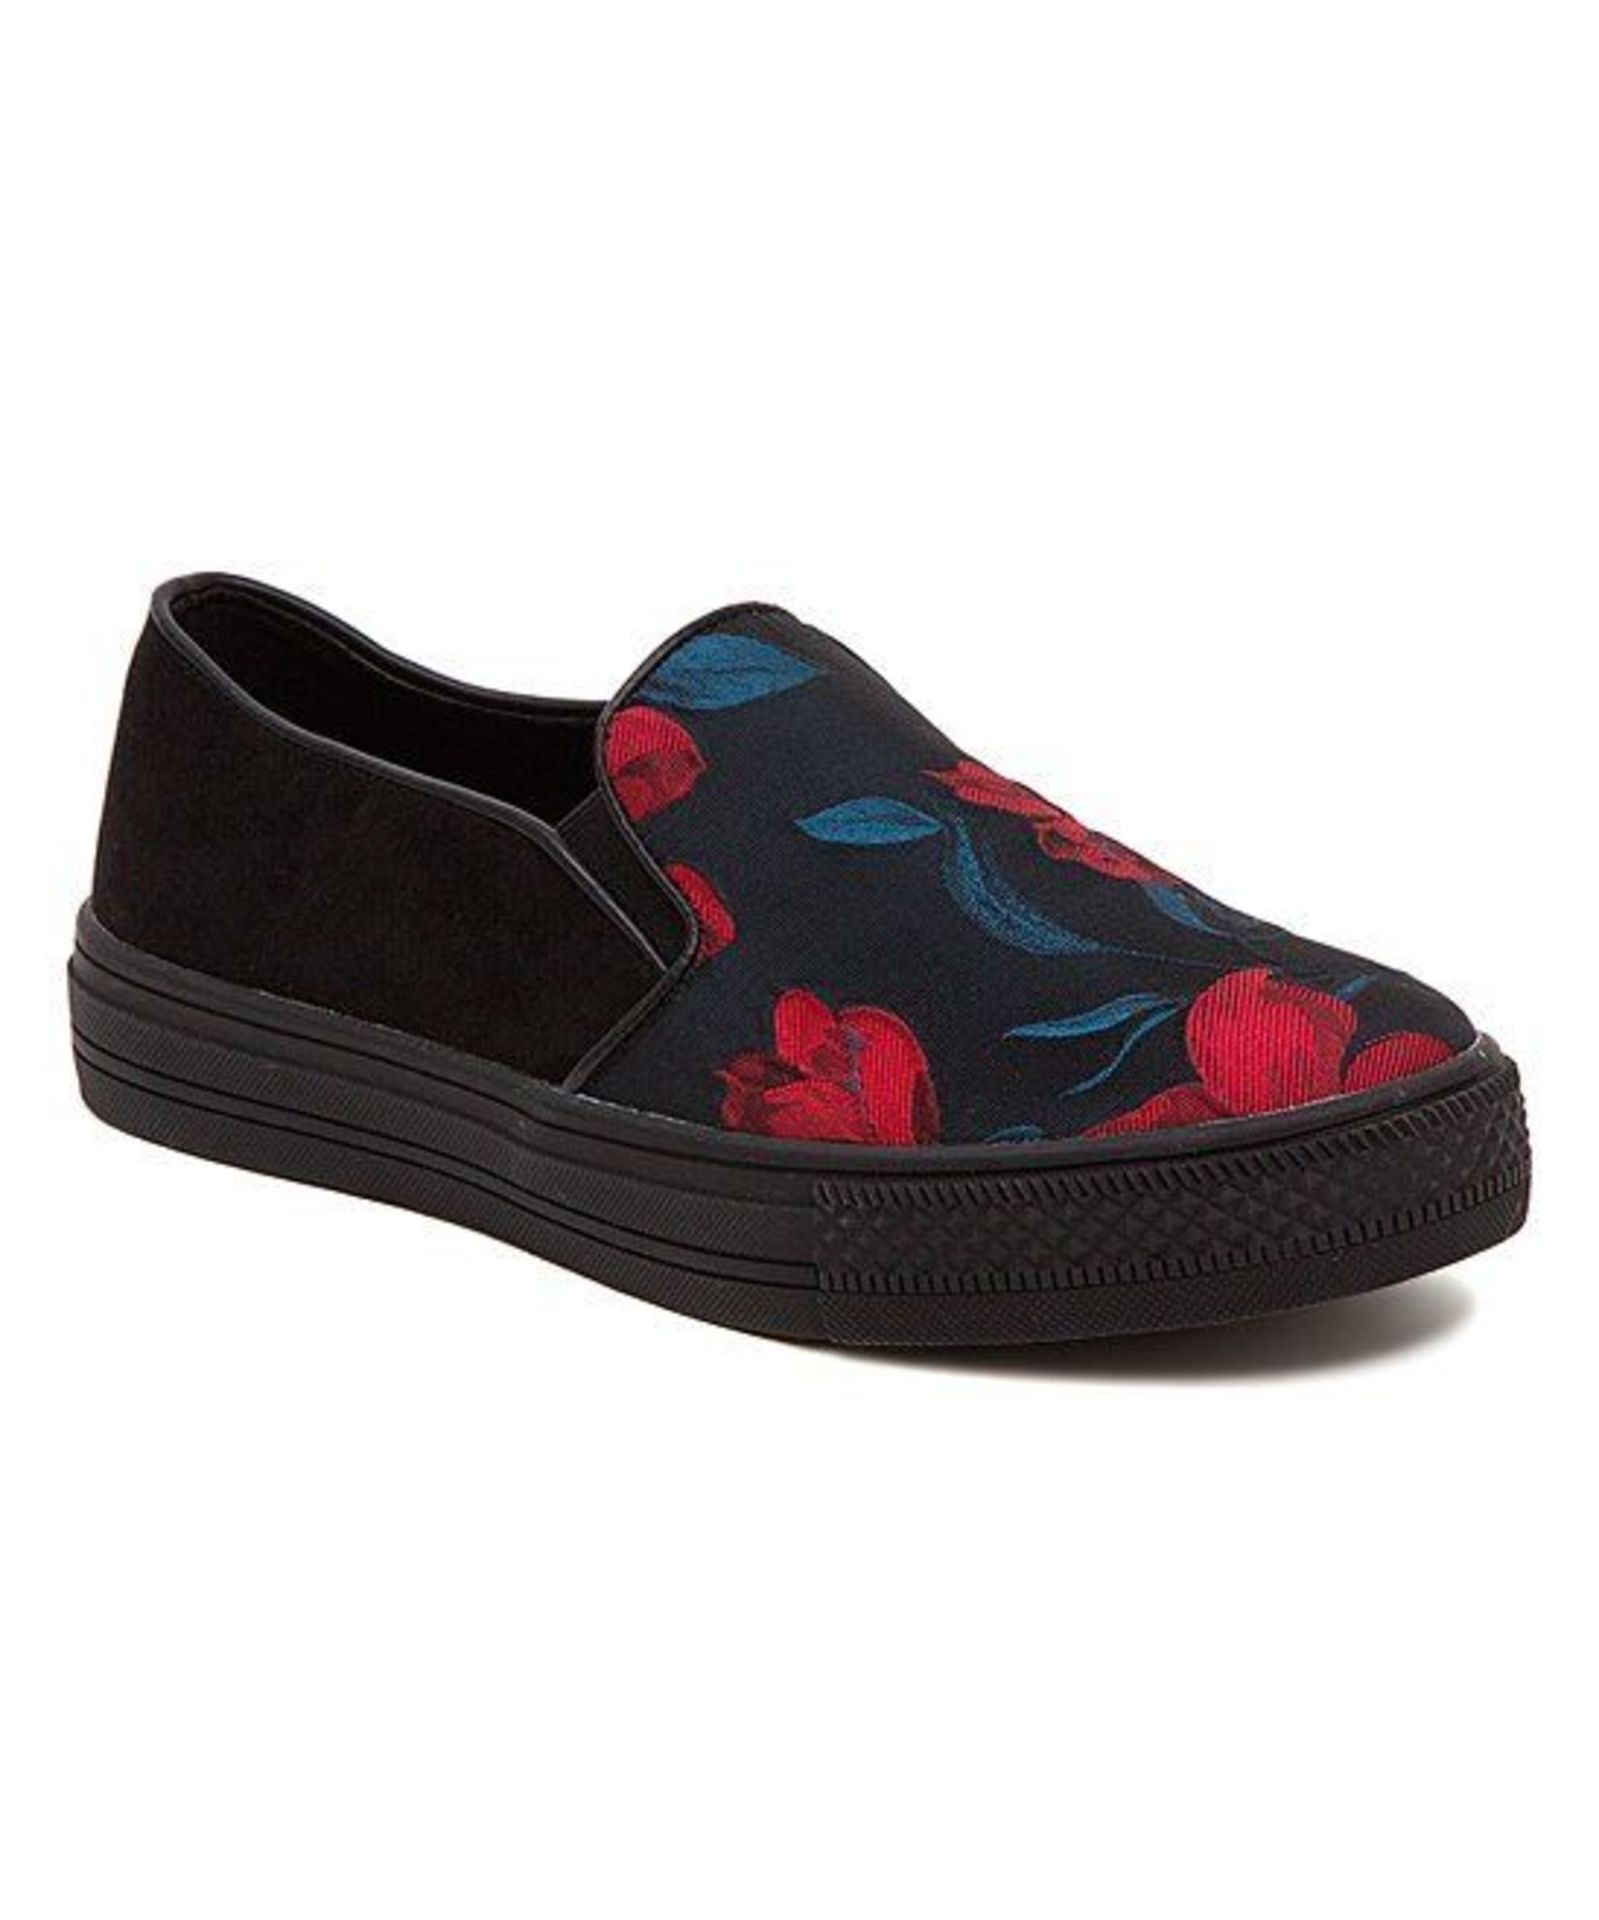 French Blu Black Bloom Sneakers (Uk Size: 5.5/Us Size: 8) (New With Box) [Ref: 50469107- F-002]-Tf